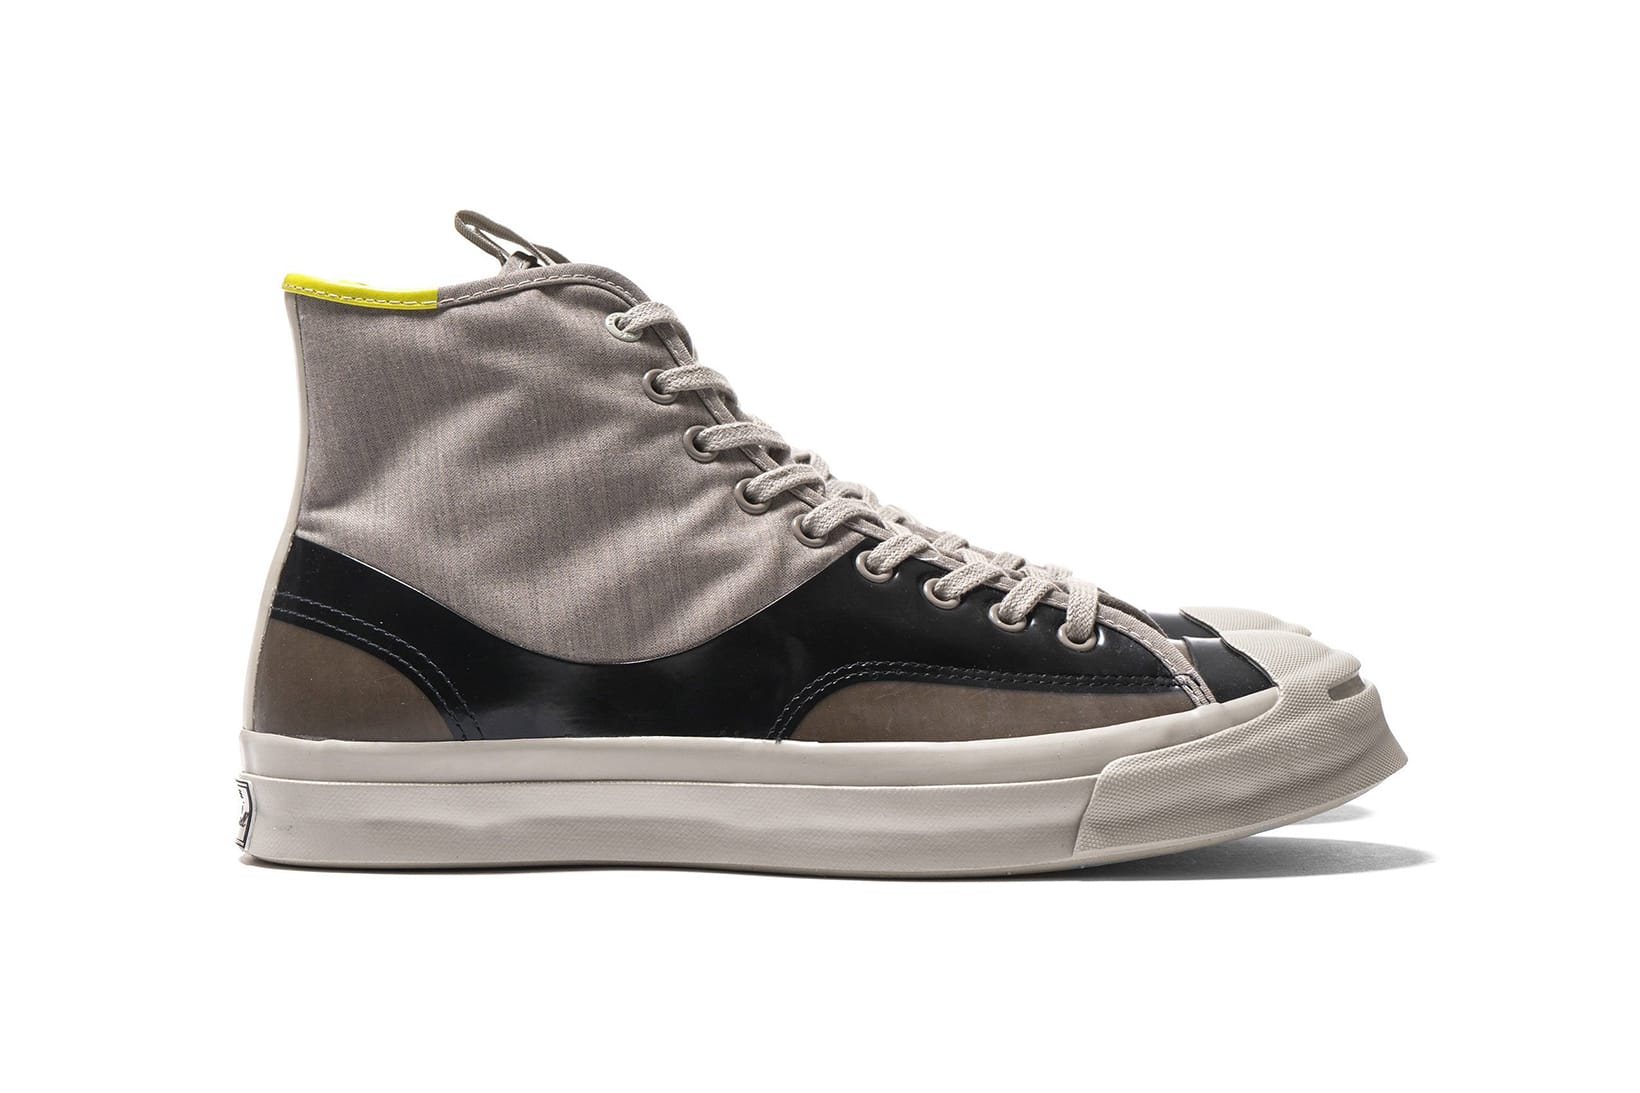 Hancock x Converse Jack Purcell Signature Mid in \